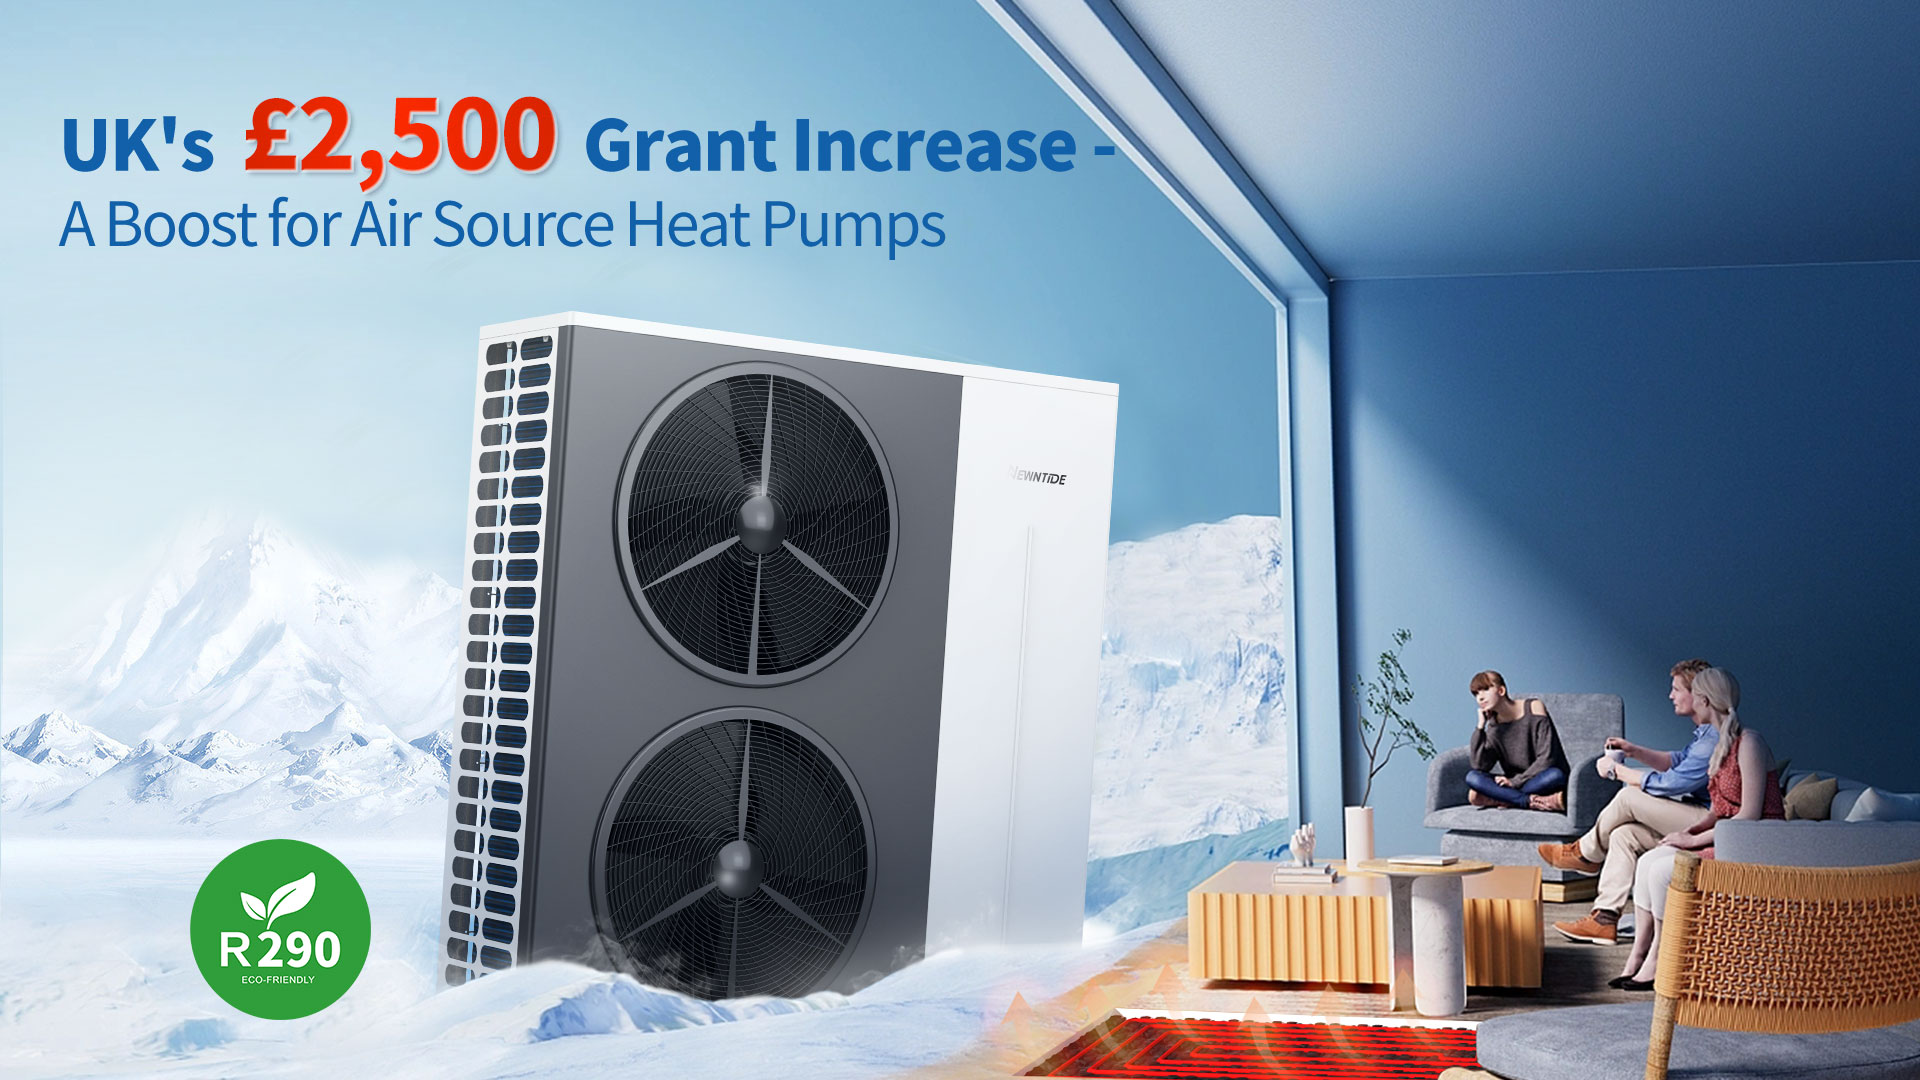 UK's £2,500 Grant Increase - A Boost for Air Source Heat Pumps